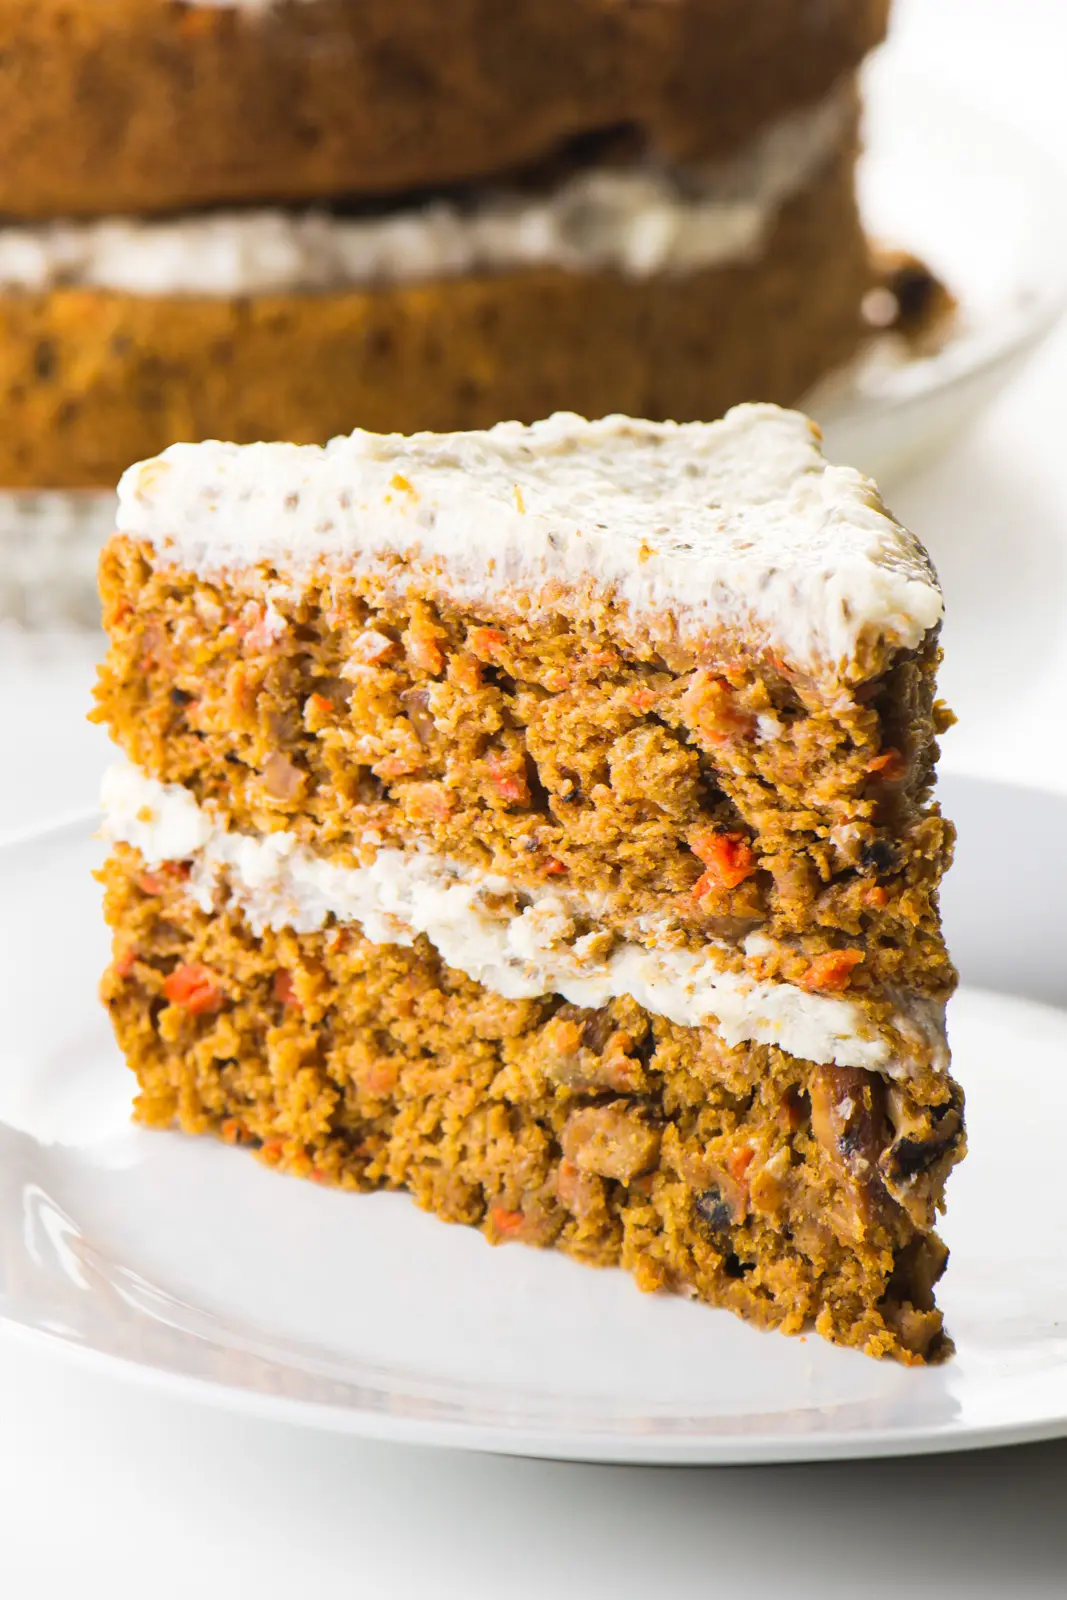 A slice of healthy carrot cake sits on a plate in front of the whole cake behind it.